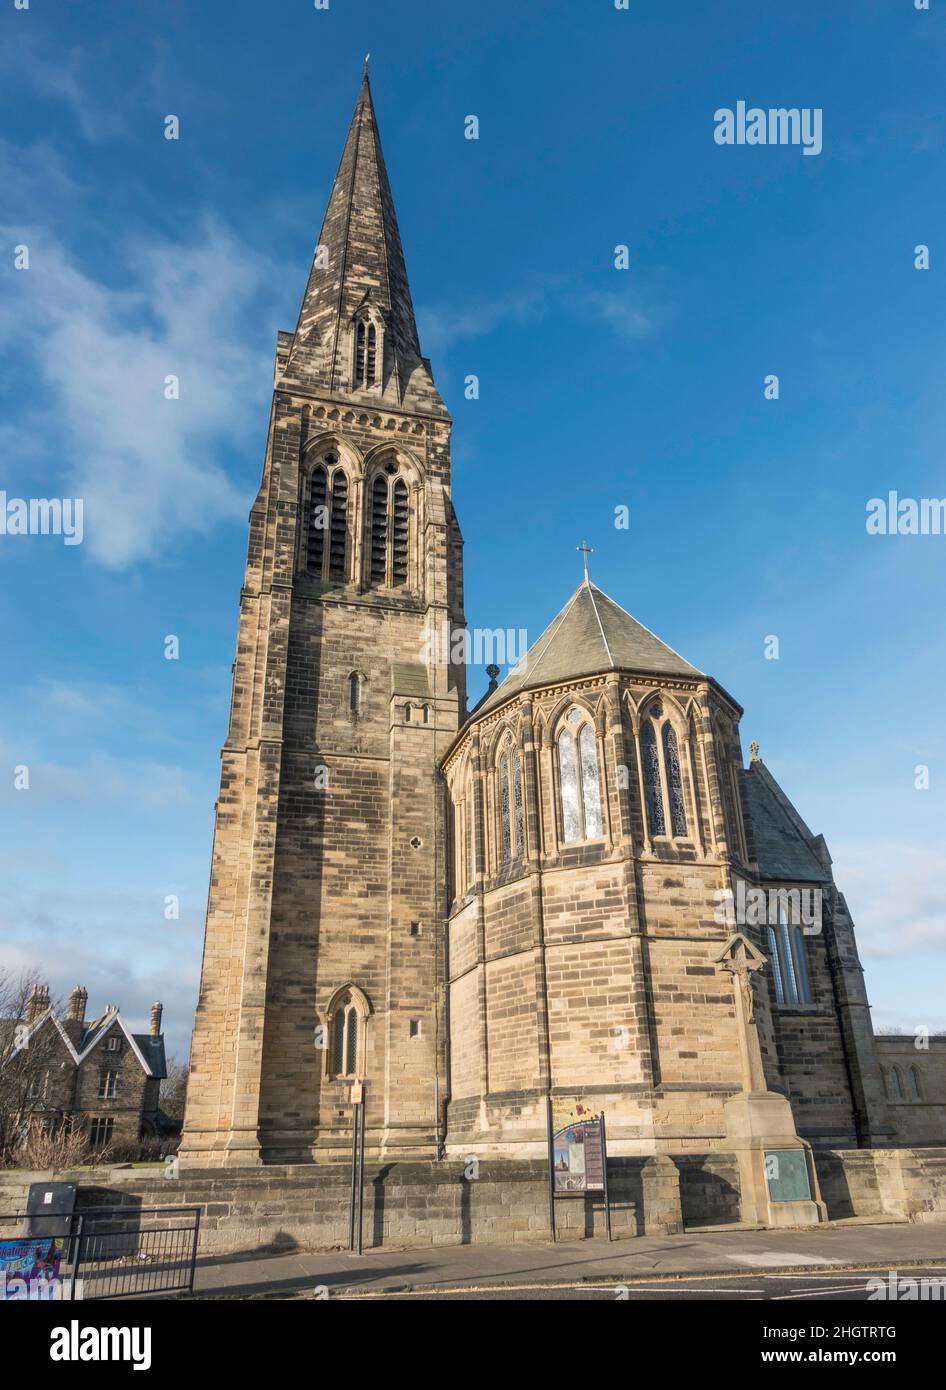 19th century listed building, St George's church in Cullercoats, north Tyneside, England, UK. Stock Photo